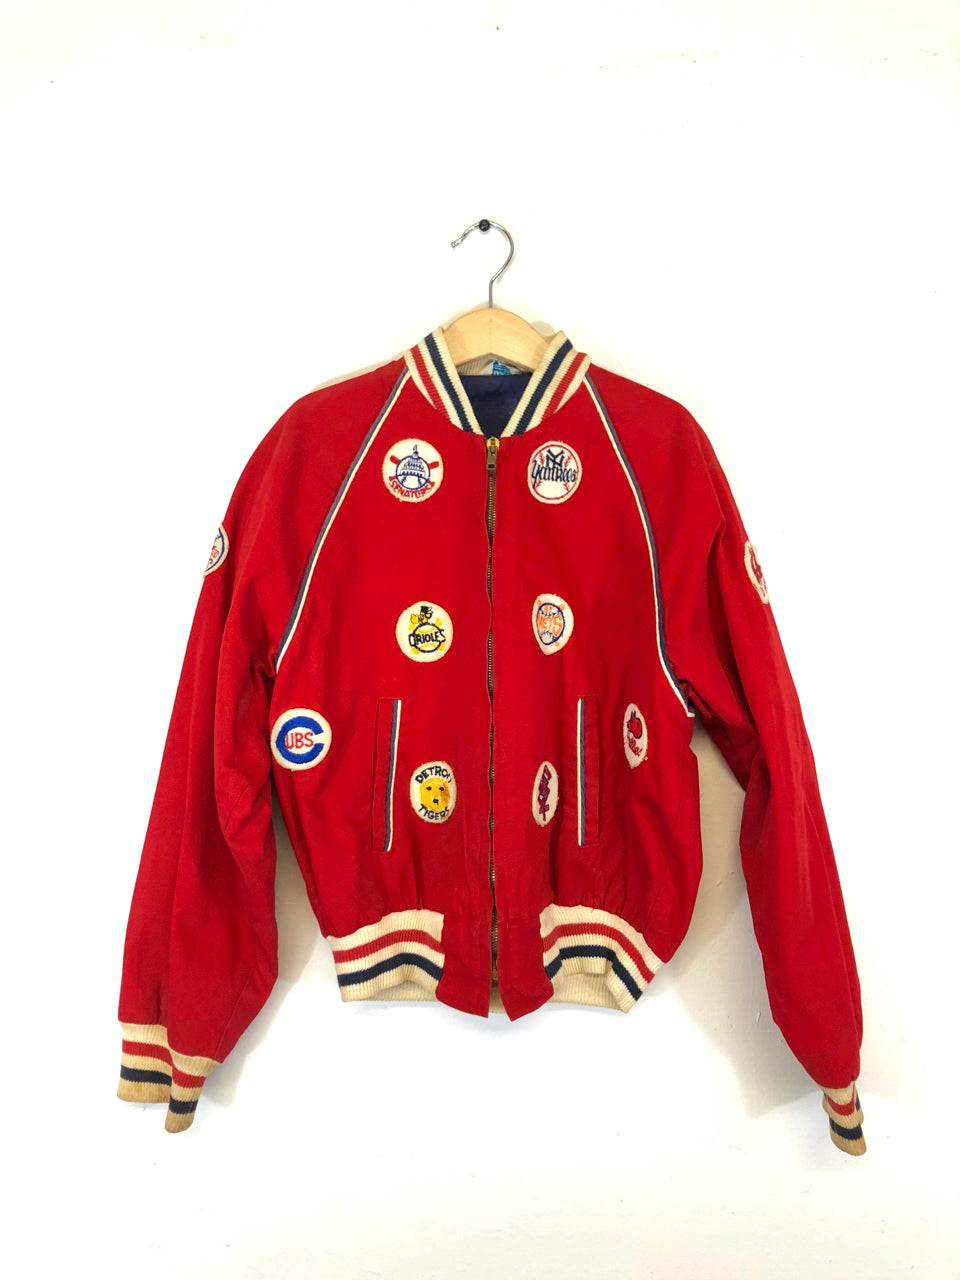 Kids' Patched Jacket